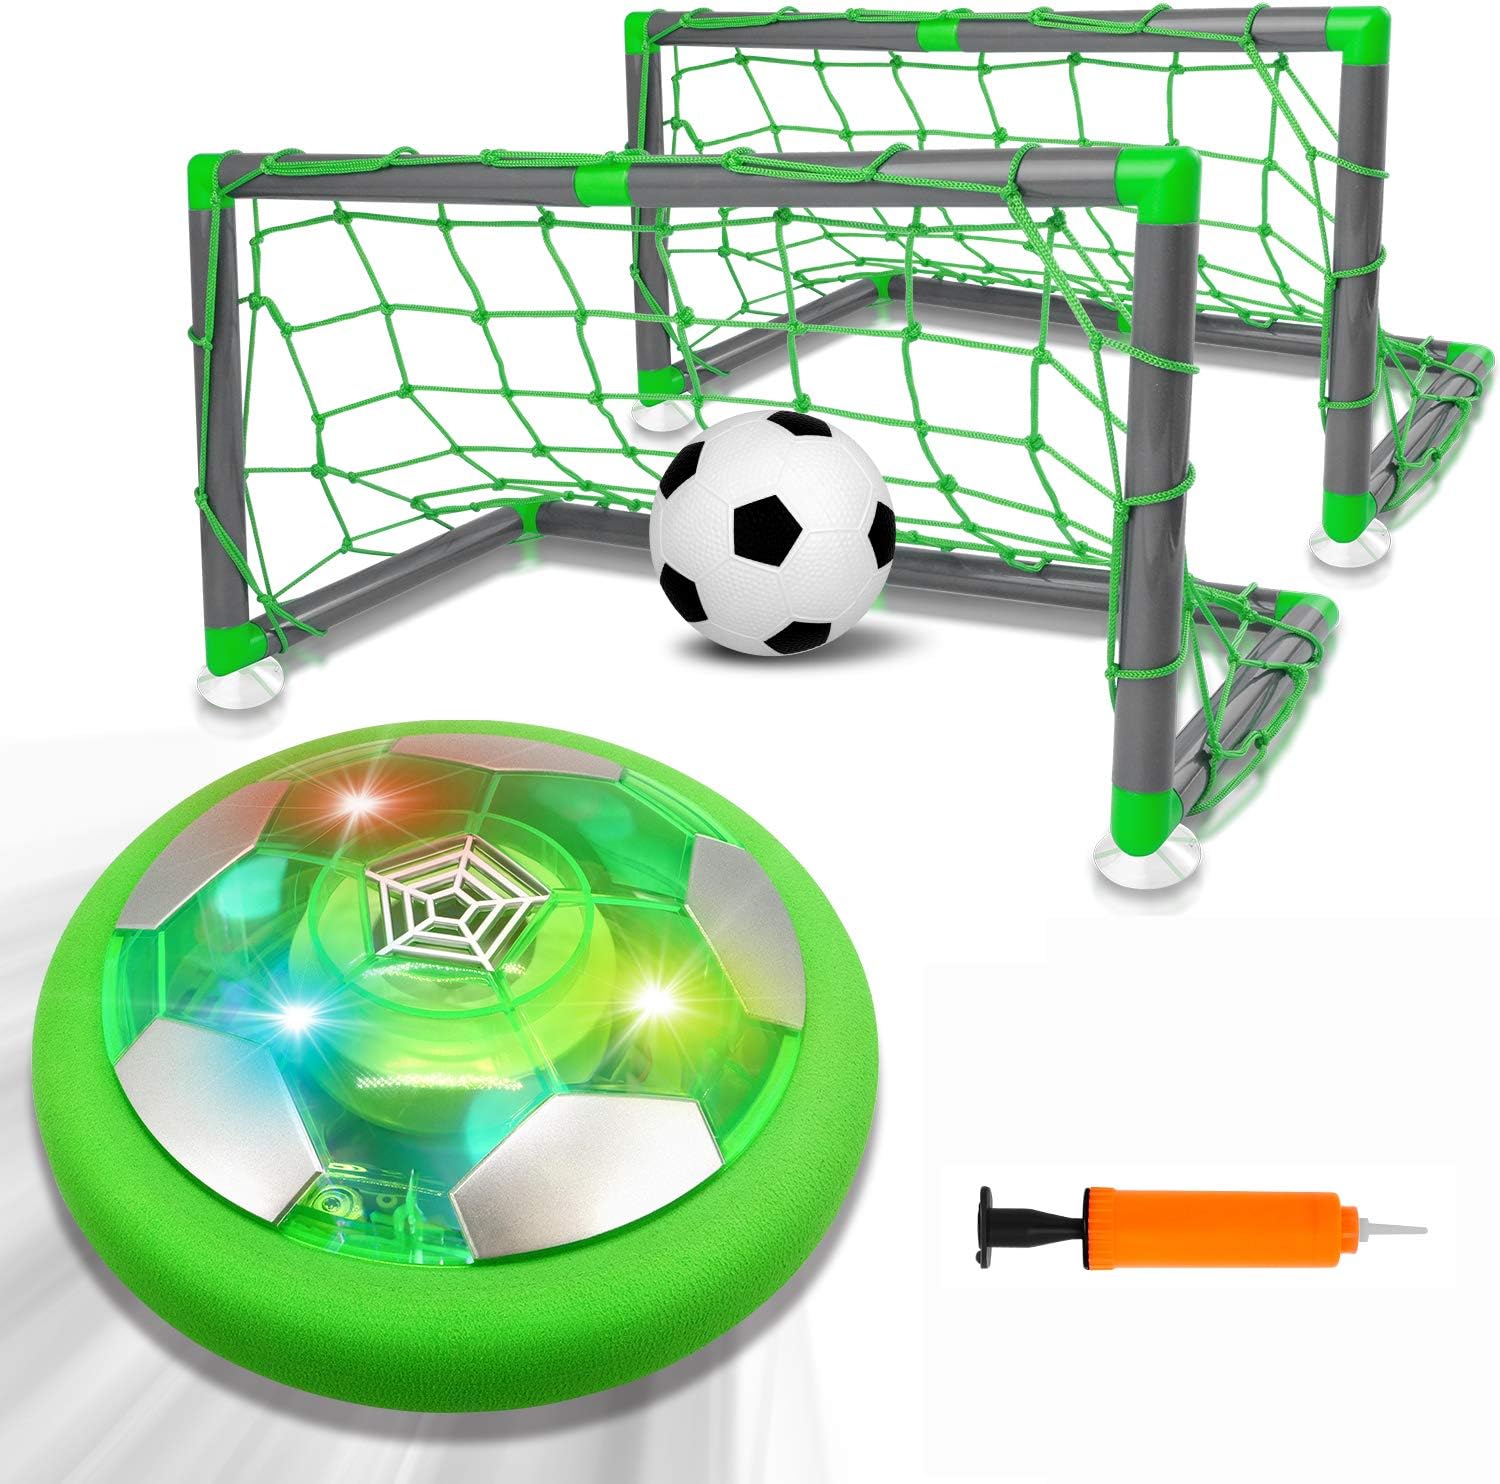 AOKESI+Kids+Toys+Hover+Soccer+Ball+Set+with+2+Goal+%26+1+Kids+Soccer+Ball%2c+LED+Light+Soccer+Games%2c+Hover+Toys+with+Foam+Bumper+for+Indoor+Games%2c+Toddler+Boy+Toys+Gifts+for+2-13+Year+Old+Boys+Girls+Toys